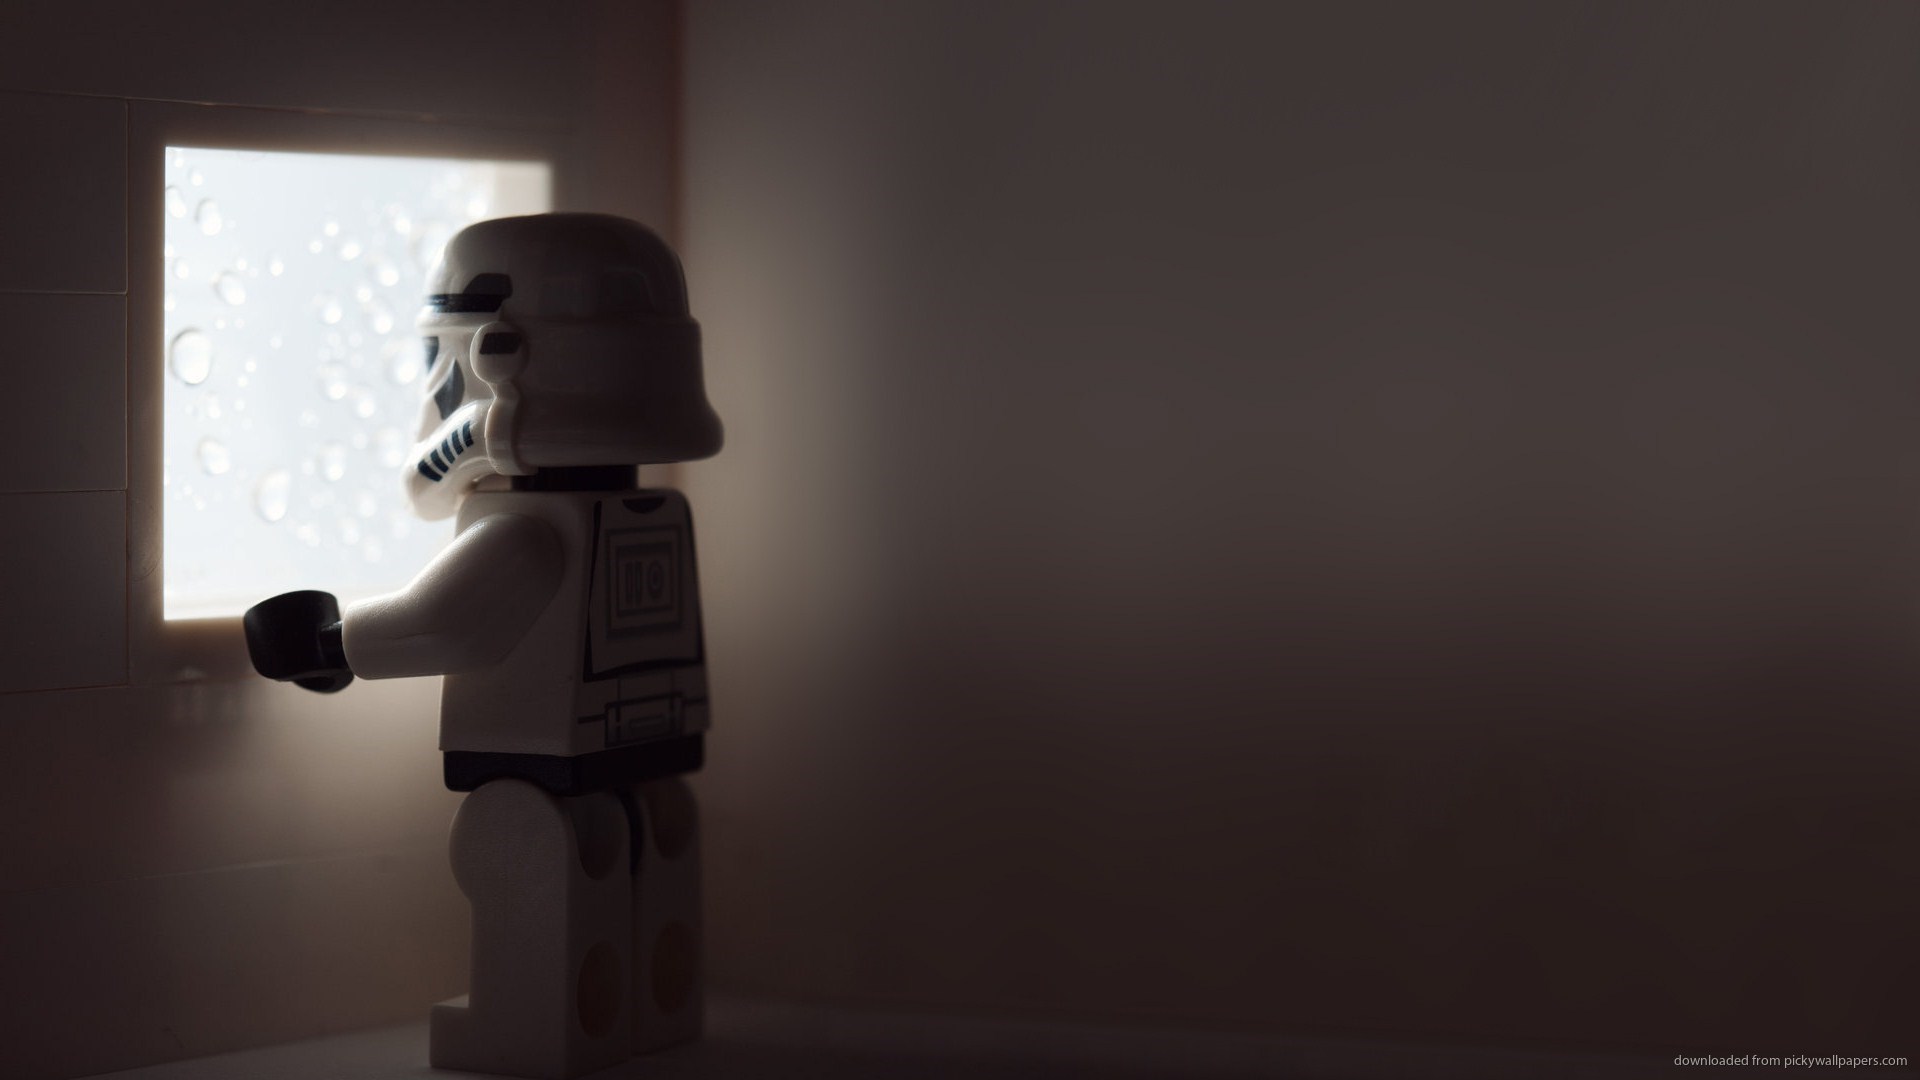 Star Wars Lego Toy Wallpaper Picture For iPhone Blackberry iPad